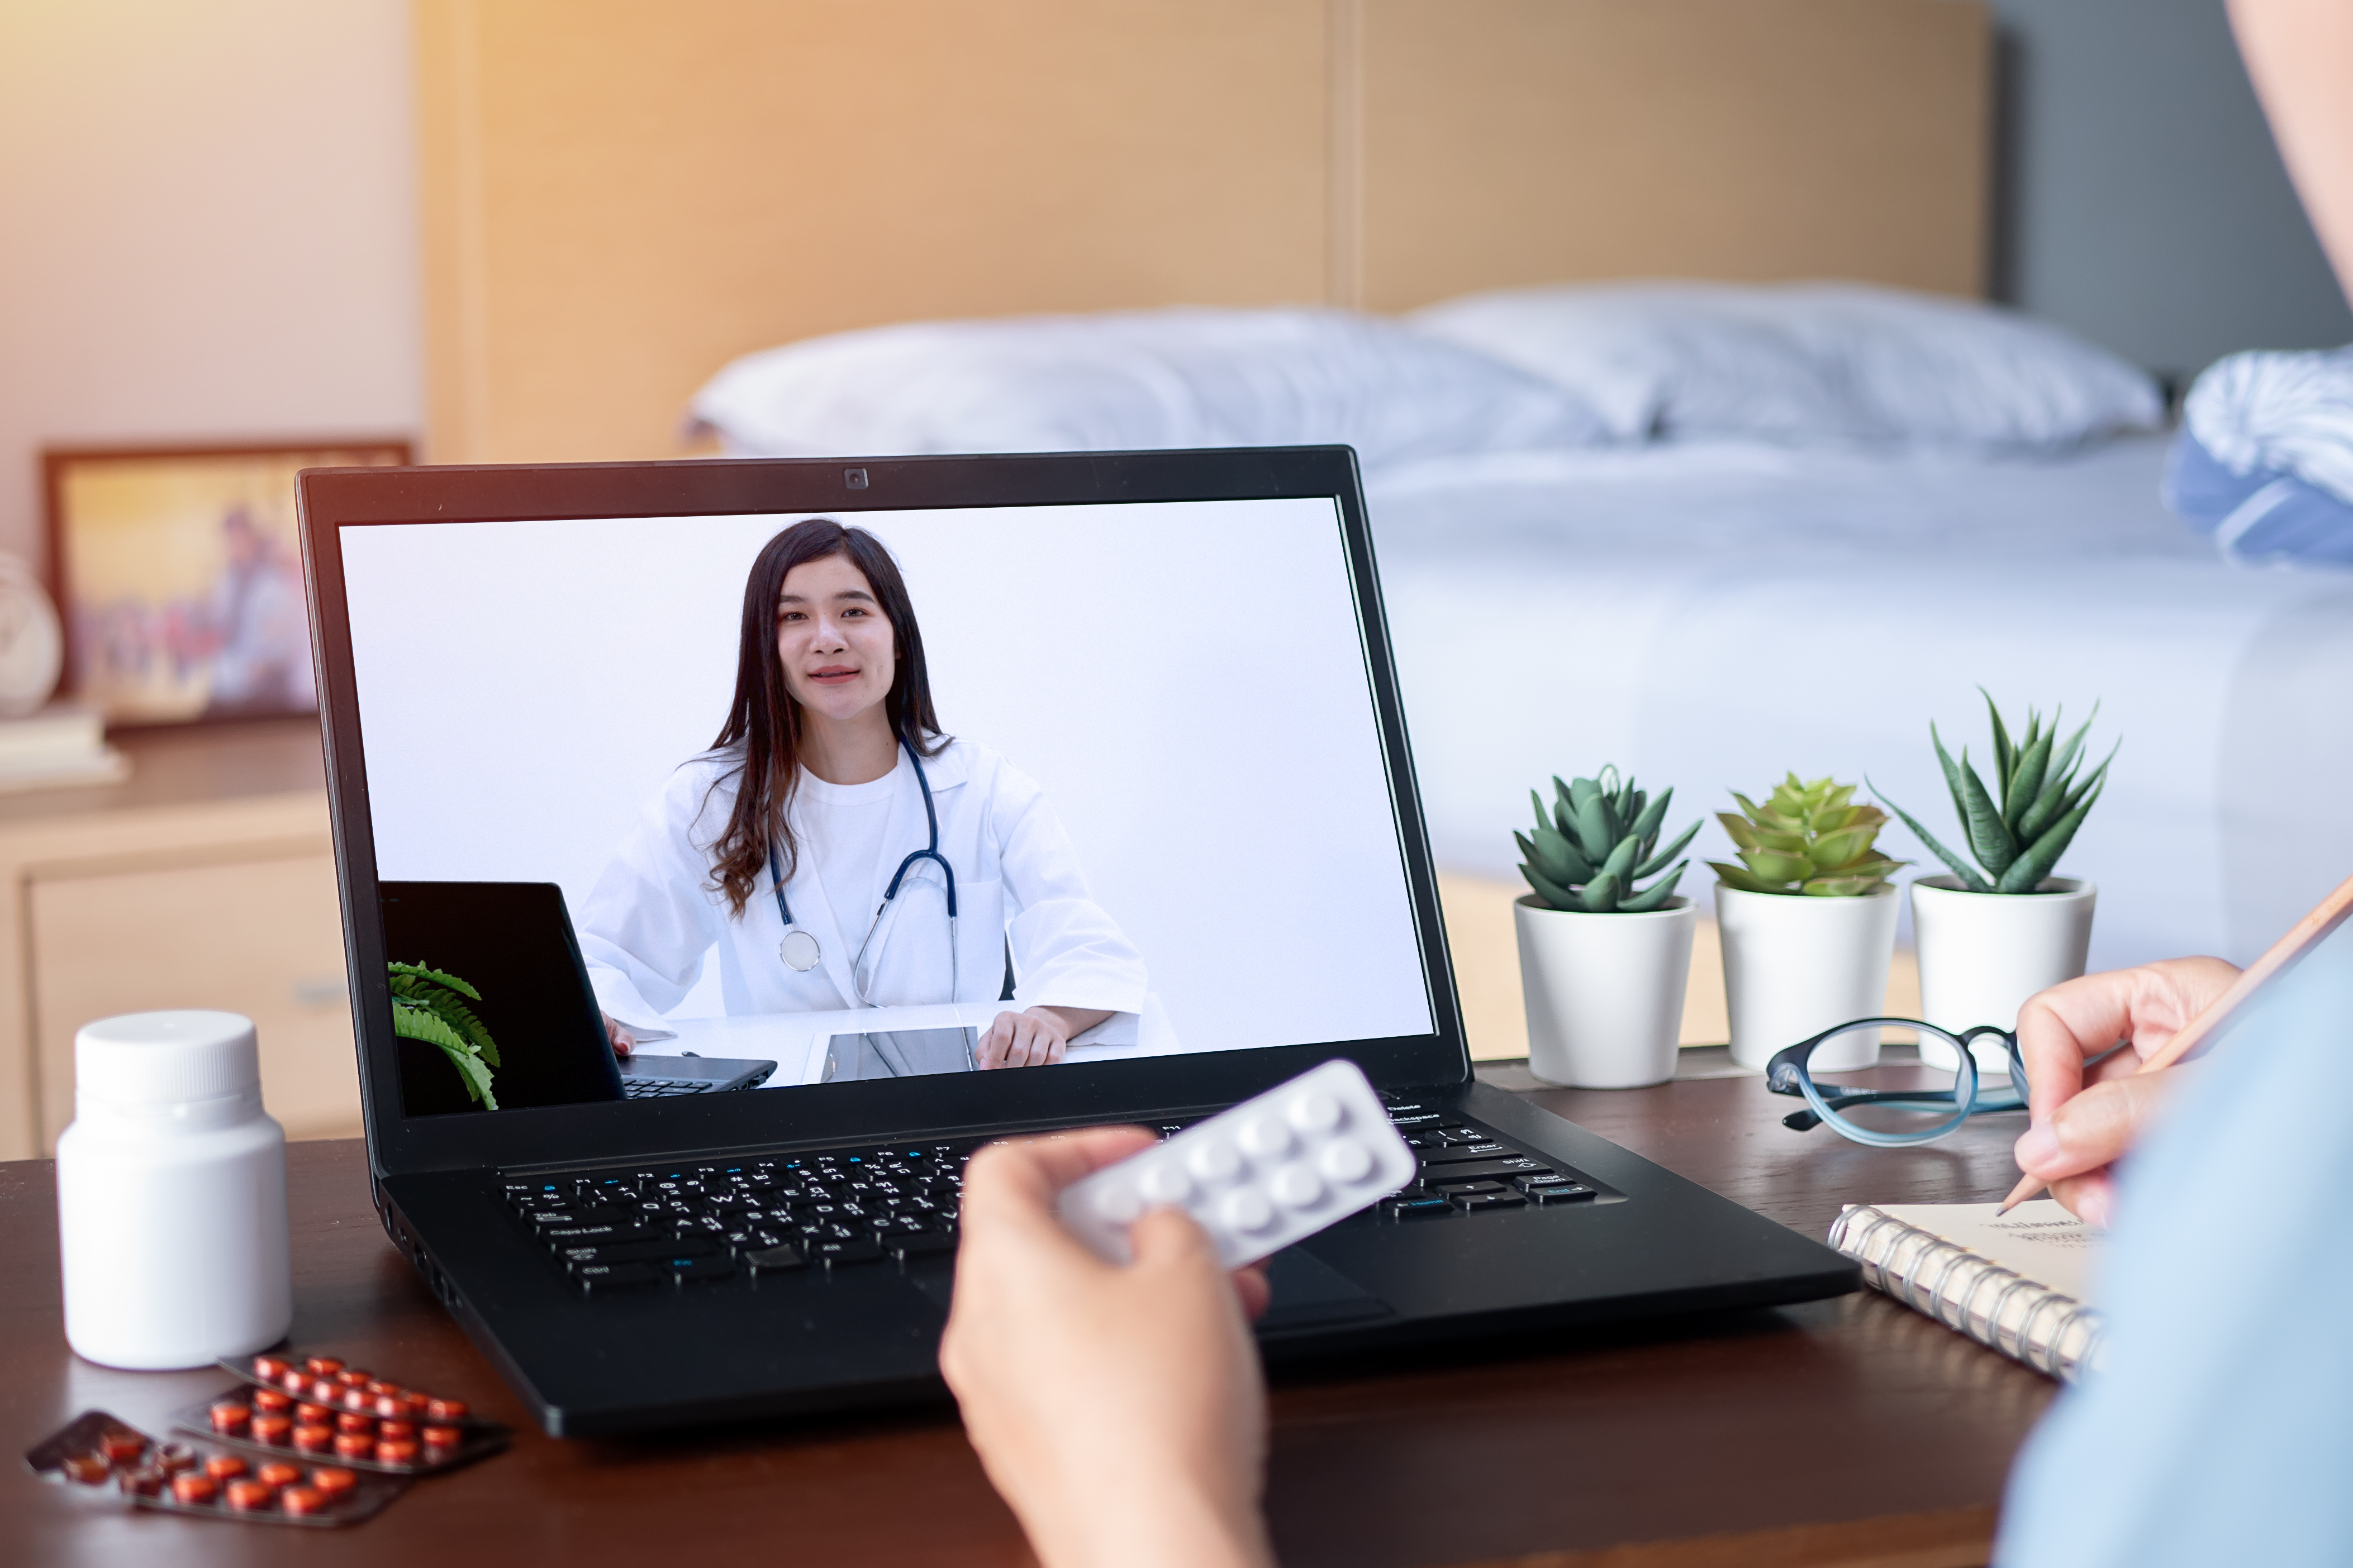 Using video to manage chronic disease